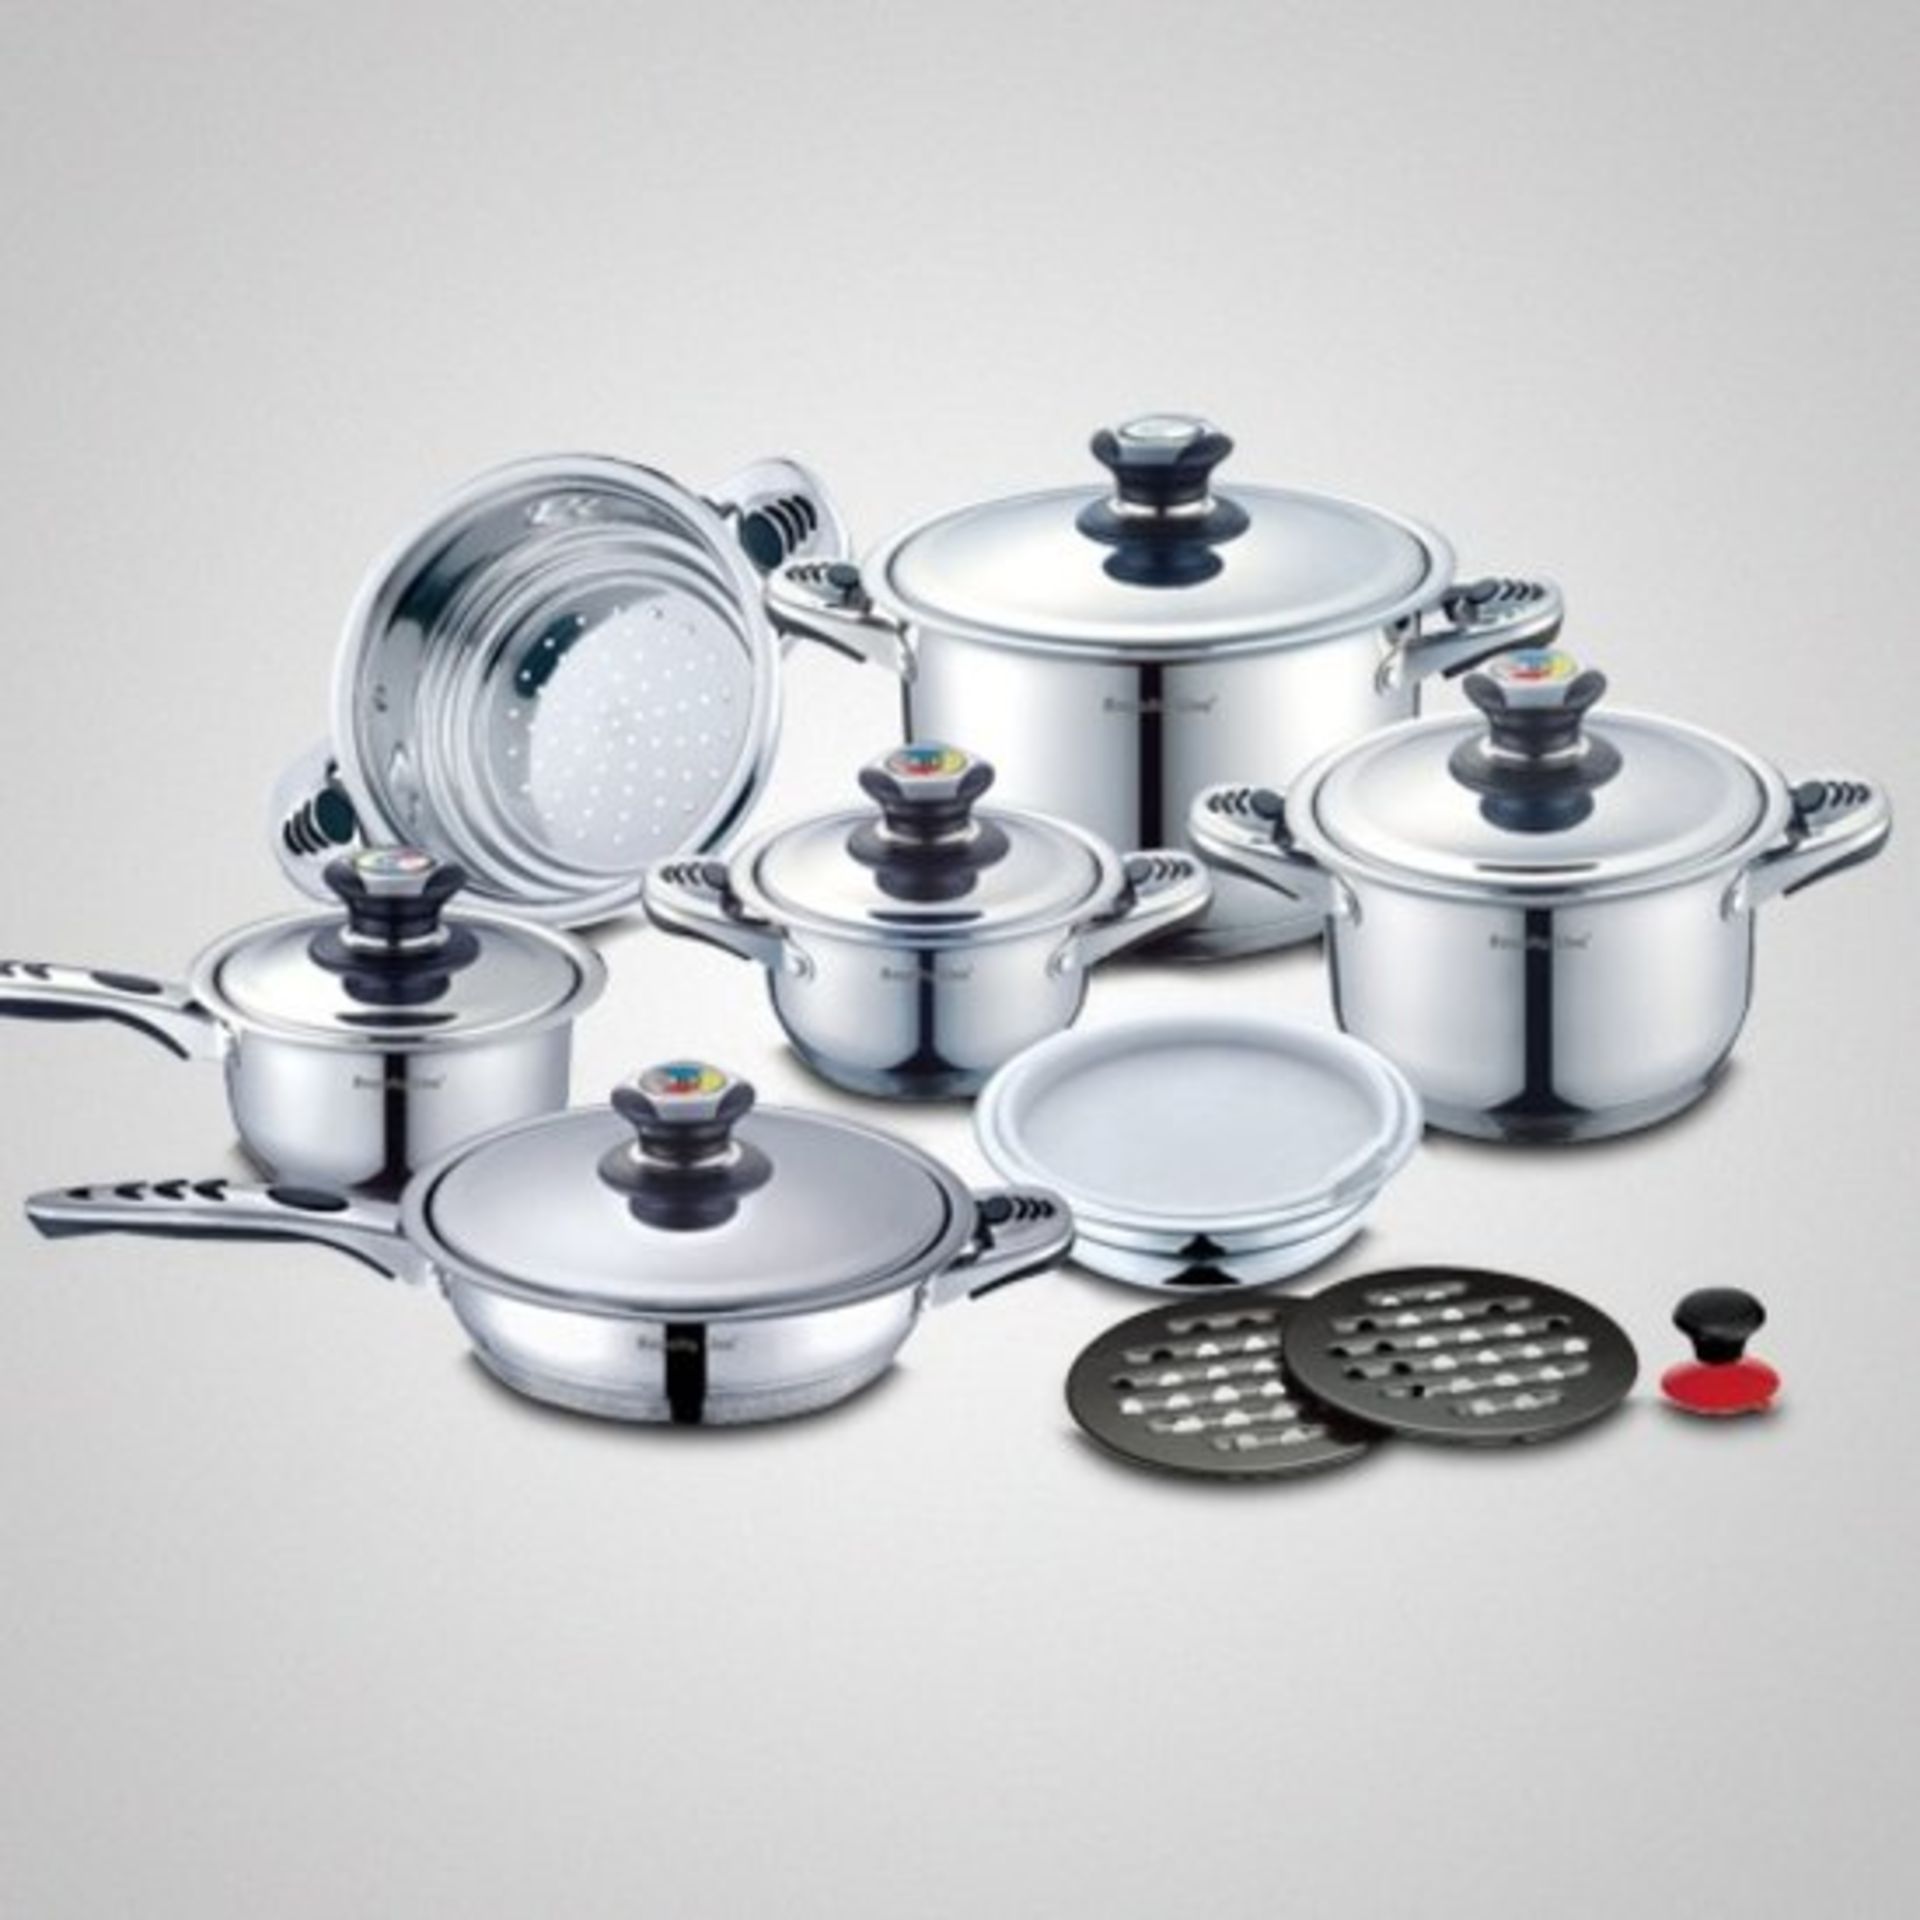 V Brand New Royalty Line 16 Piece Stainless Steel Cookware Set Suitable For All Types Of Stoves -